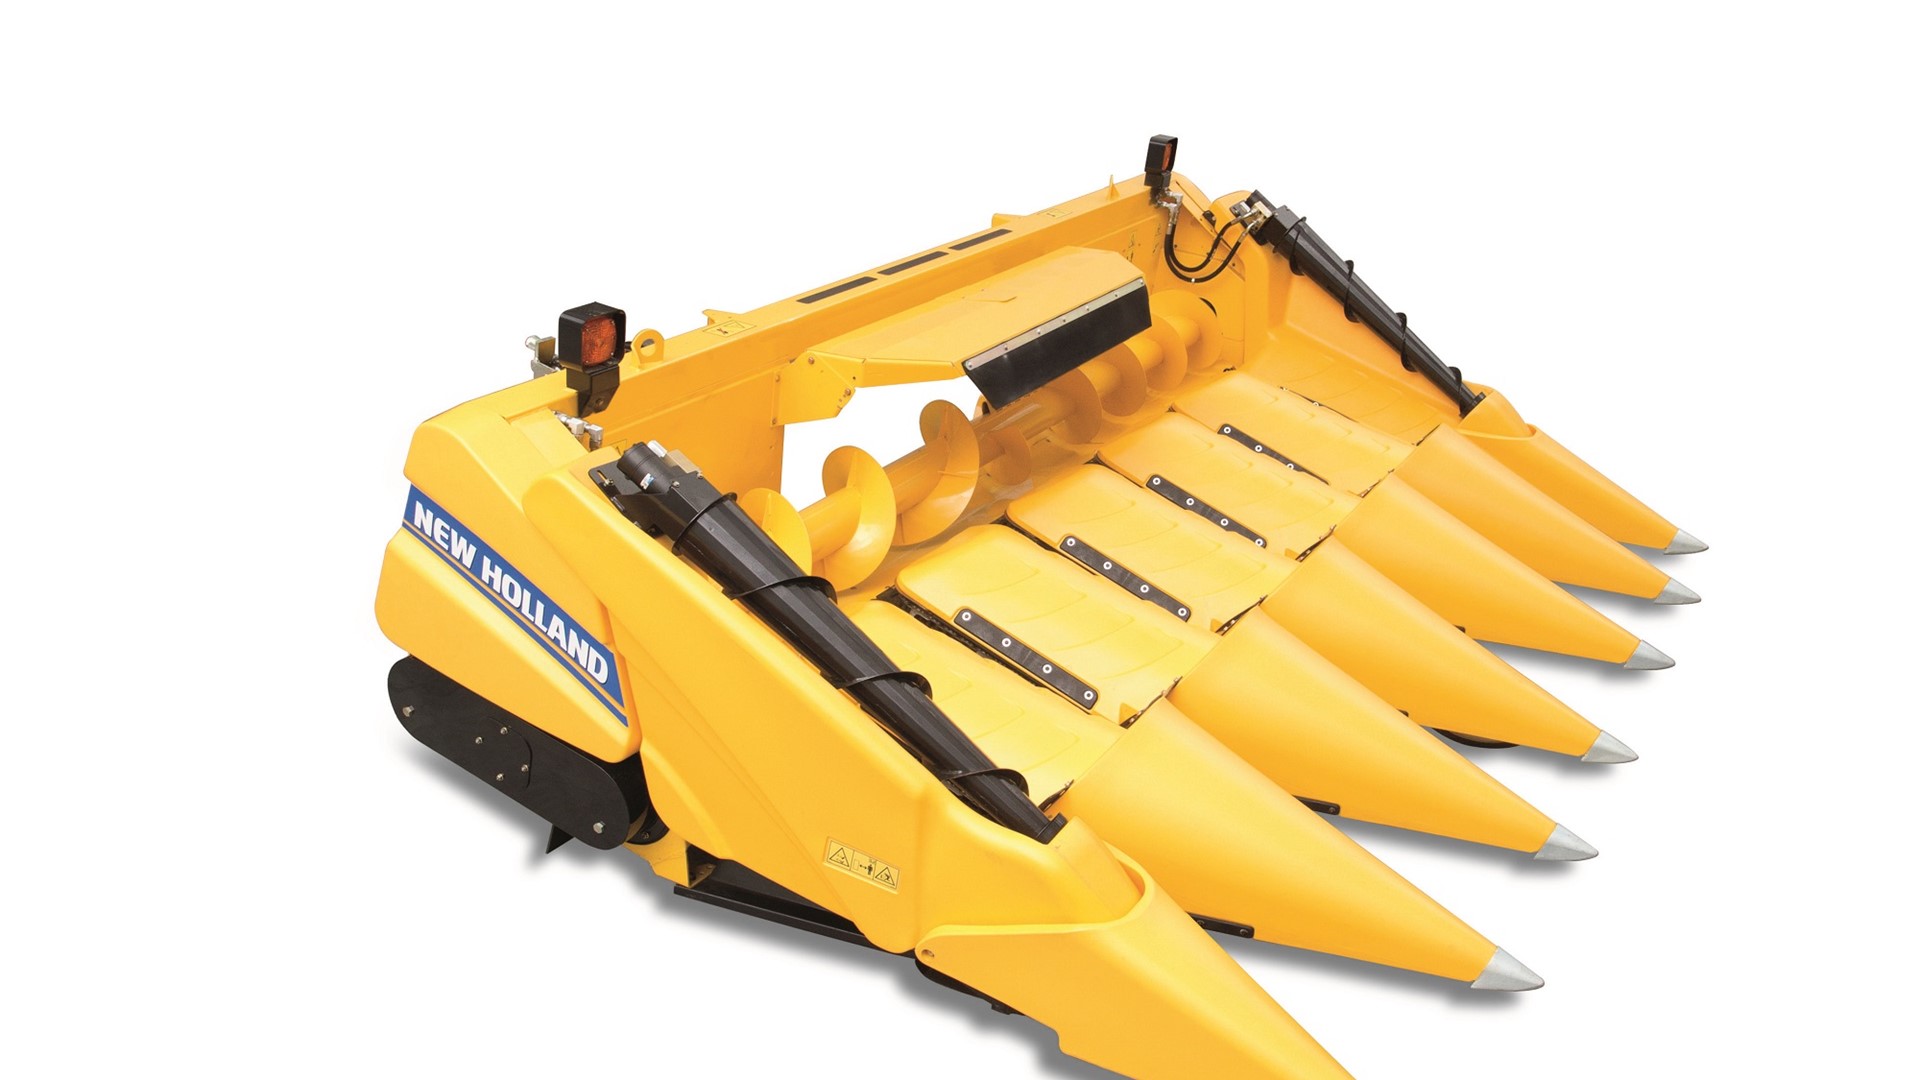 New Holland Agriculture new Combine Maize Header is available in both rigid and flip-up versions